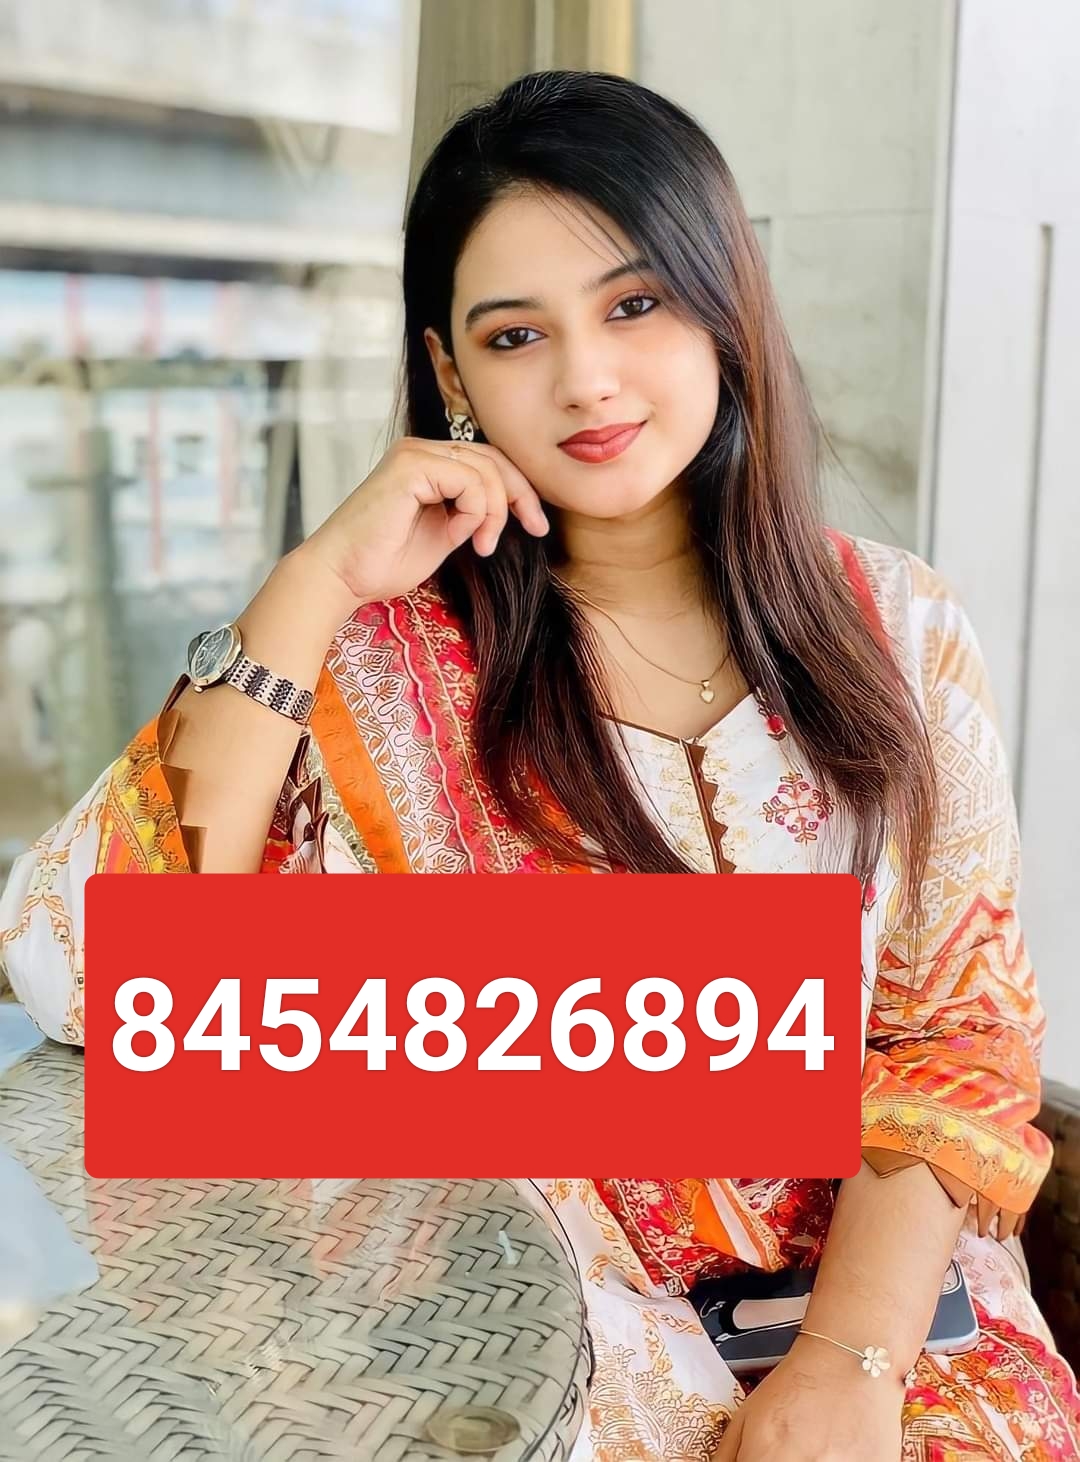 Bhiwandi independent call girls all service 